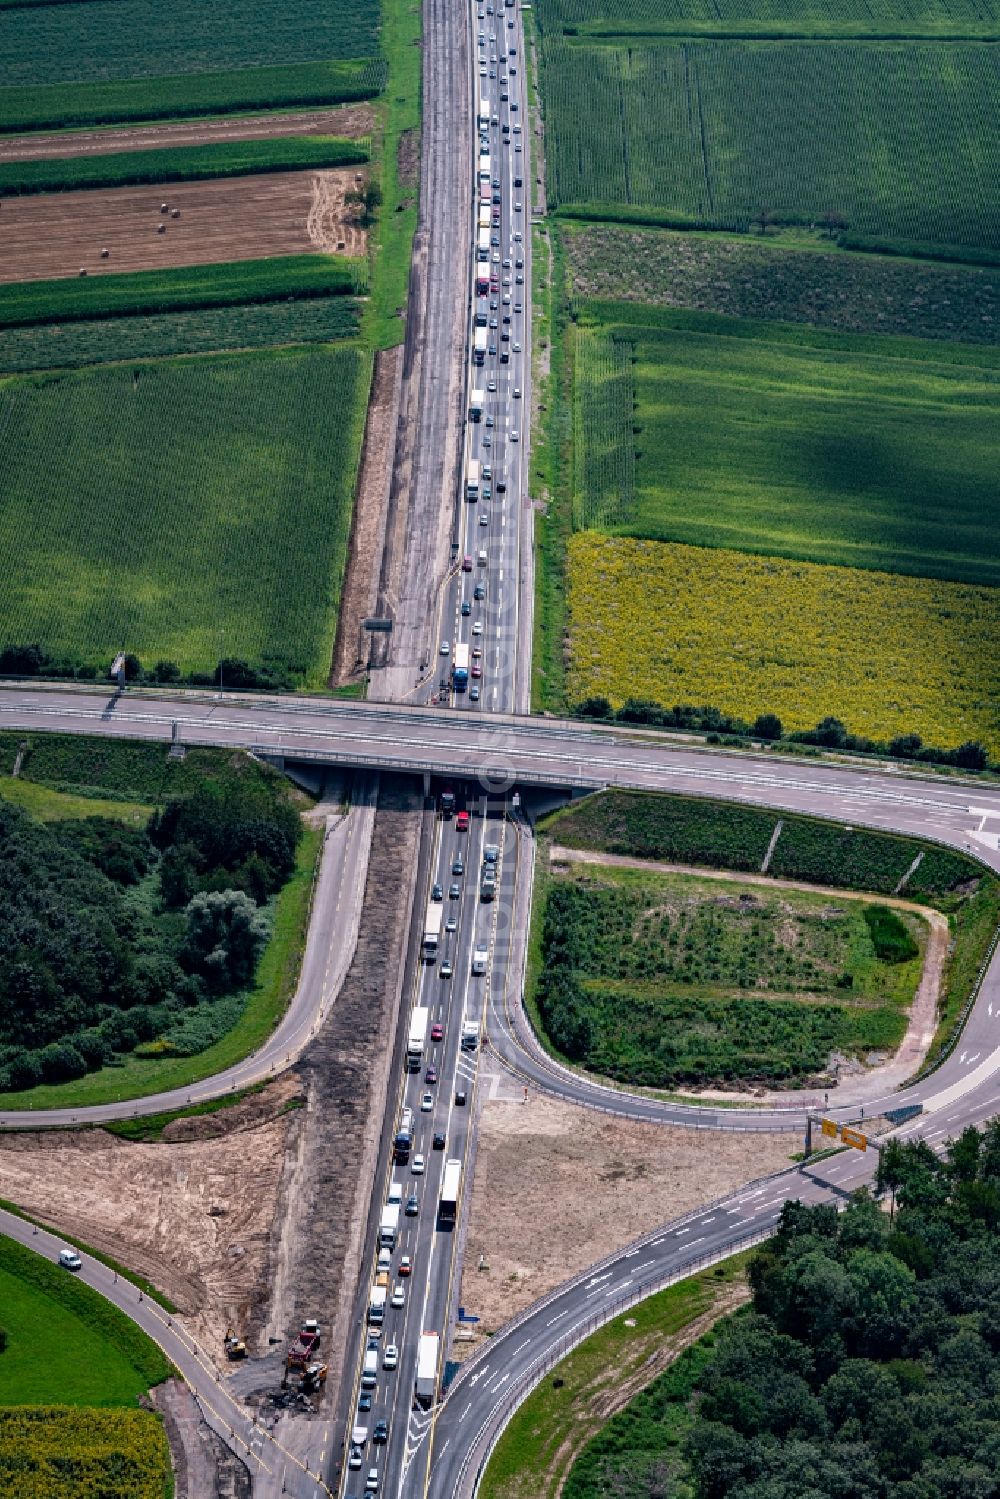 Ringsheim from the bird's eye view: Motorway congestion along the route of the lanes A5 Ausfahrt bei Ringsheim and Rust Europa-Park in Ringsheim in the state Baden-Wuerttemberg, Germany